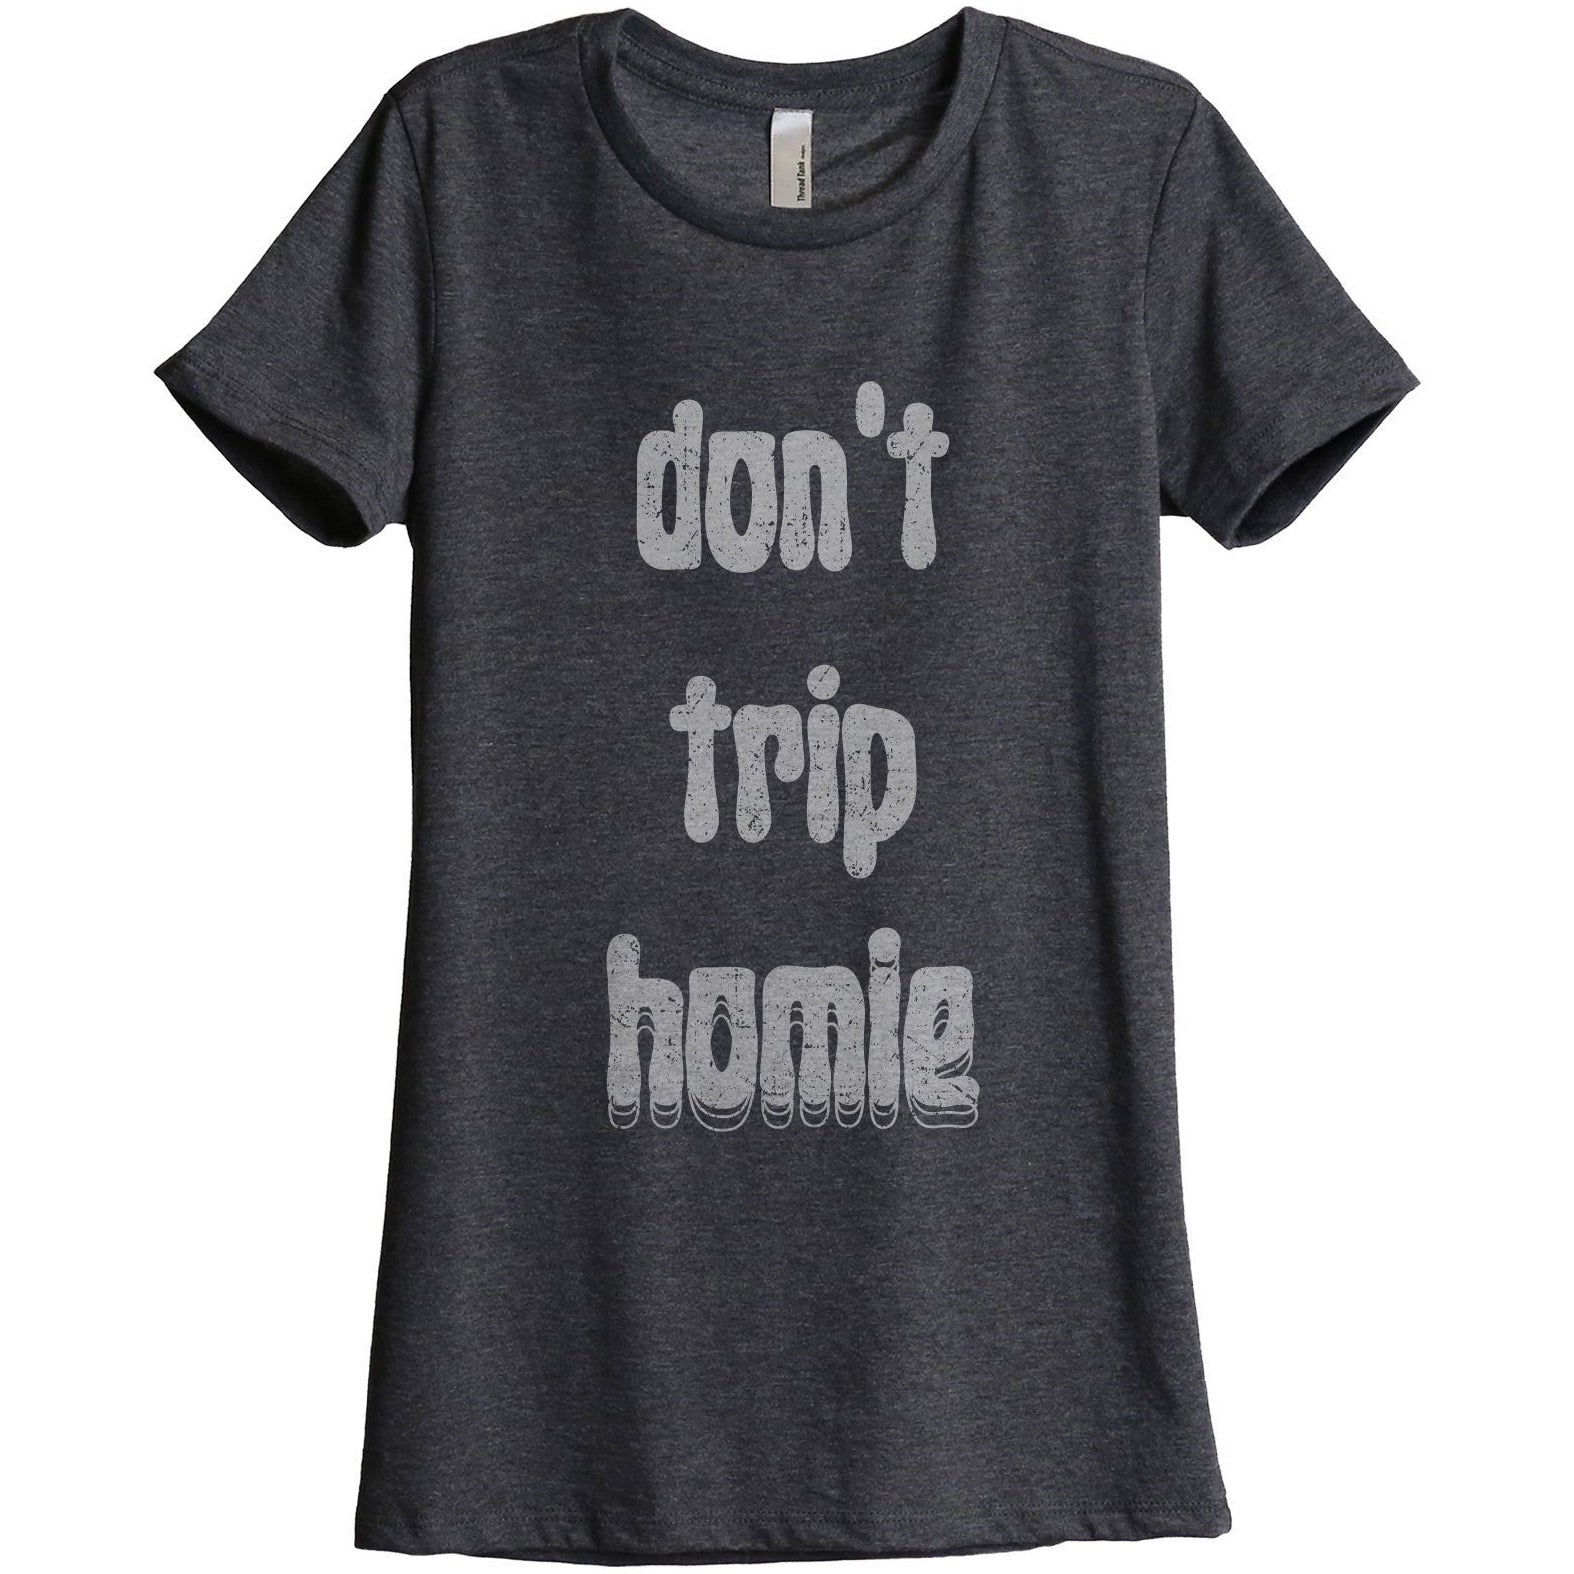 Don't Trip Homie Women's Relaxed Crewneck T-Shirt Top Tee Charcoal Grey
